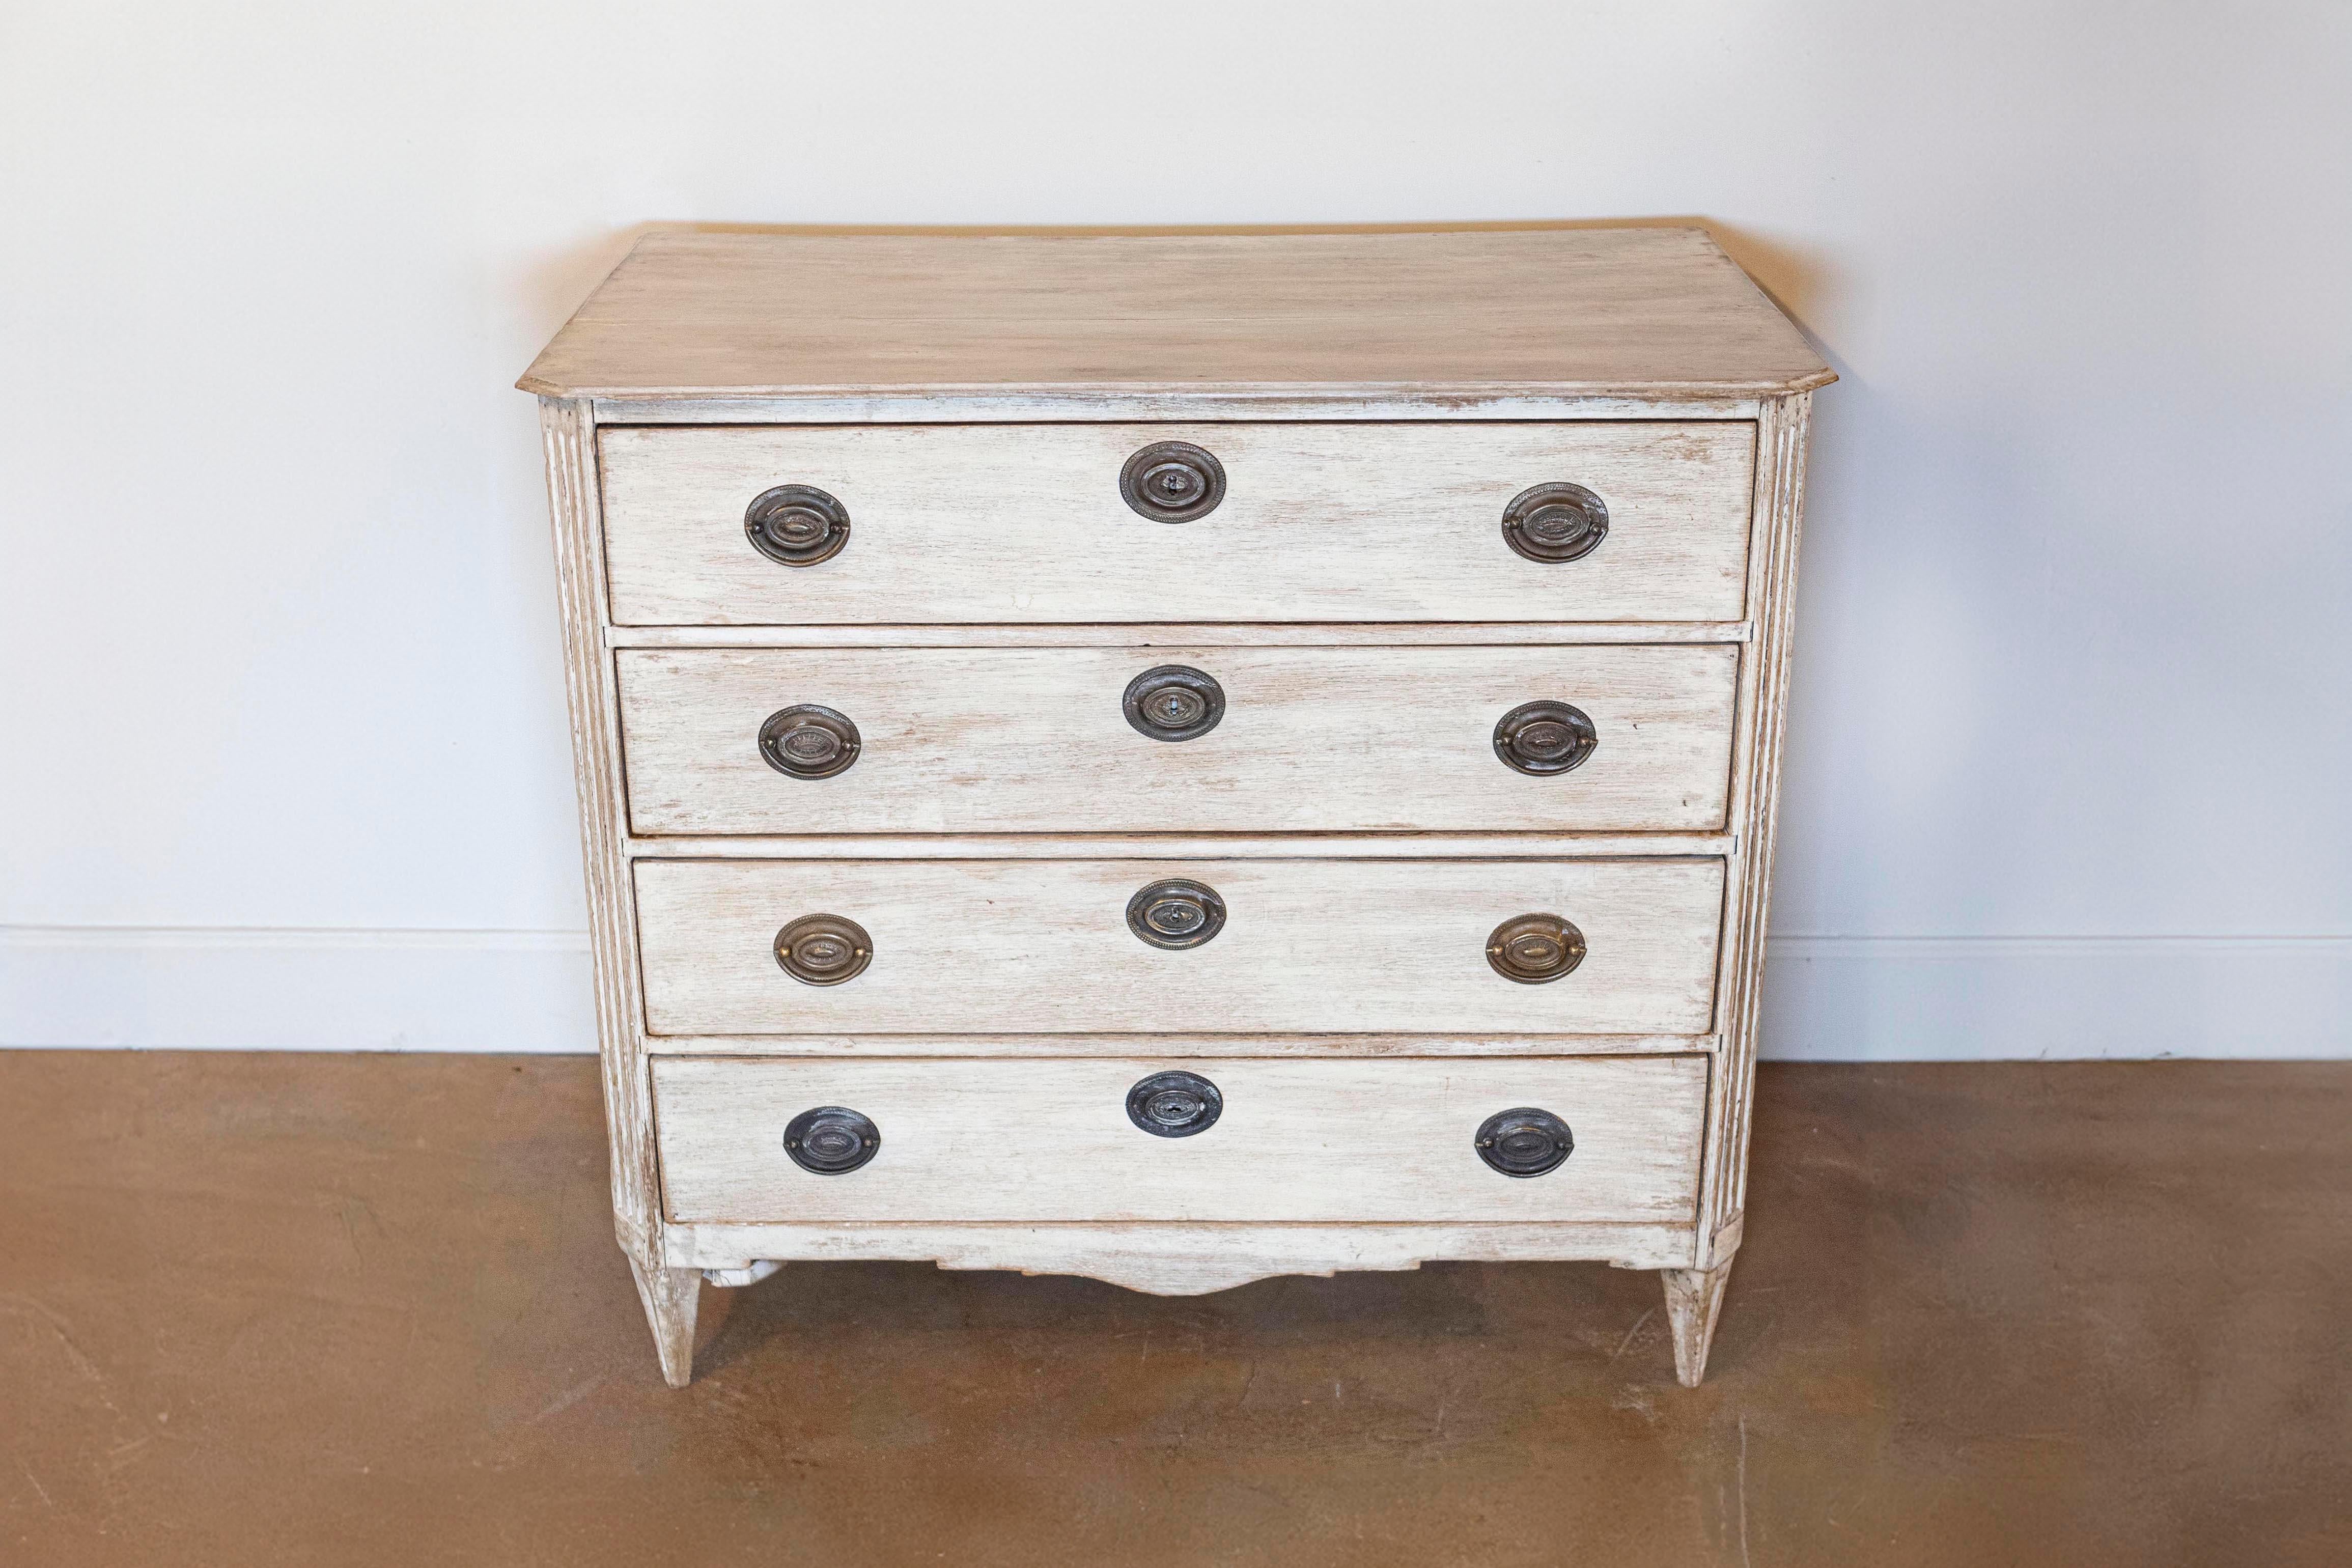 A Swedish period Gustavian four-drawer commode from the late 18th century with its old hardware. This Swedish chest circa 1780 features a rectangular top with chamfered sides in the front. Each drawer is adorned with oval escutcheons and handles. In